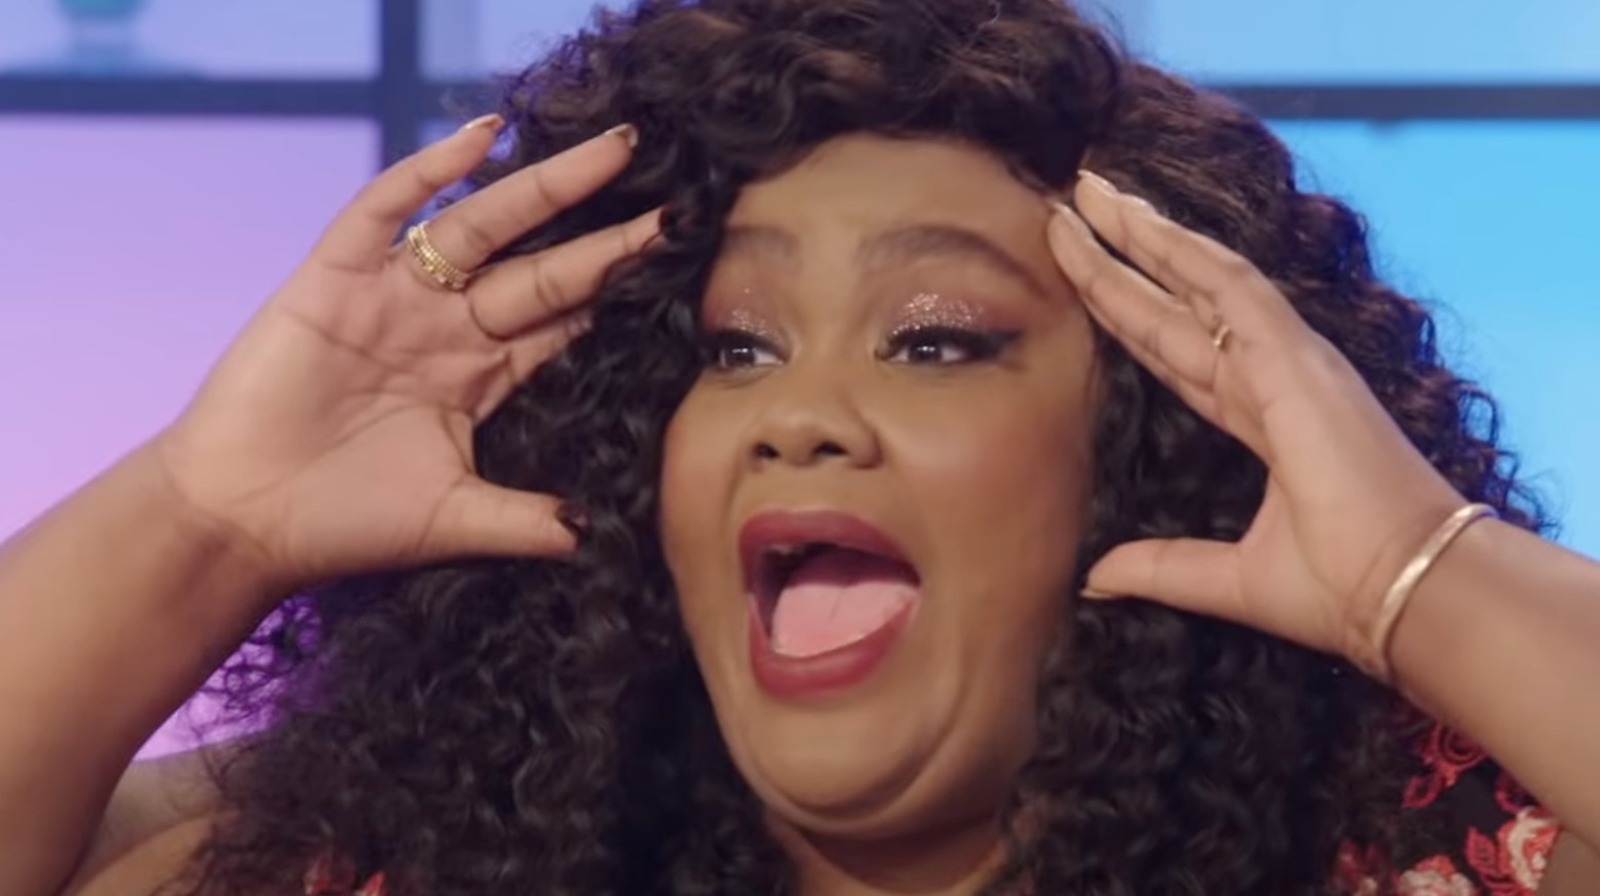 Watch Nailed It! season 5 episode 6 streaming online | BetaSeries.com